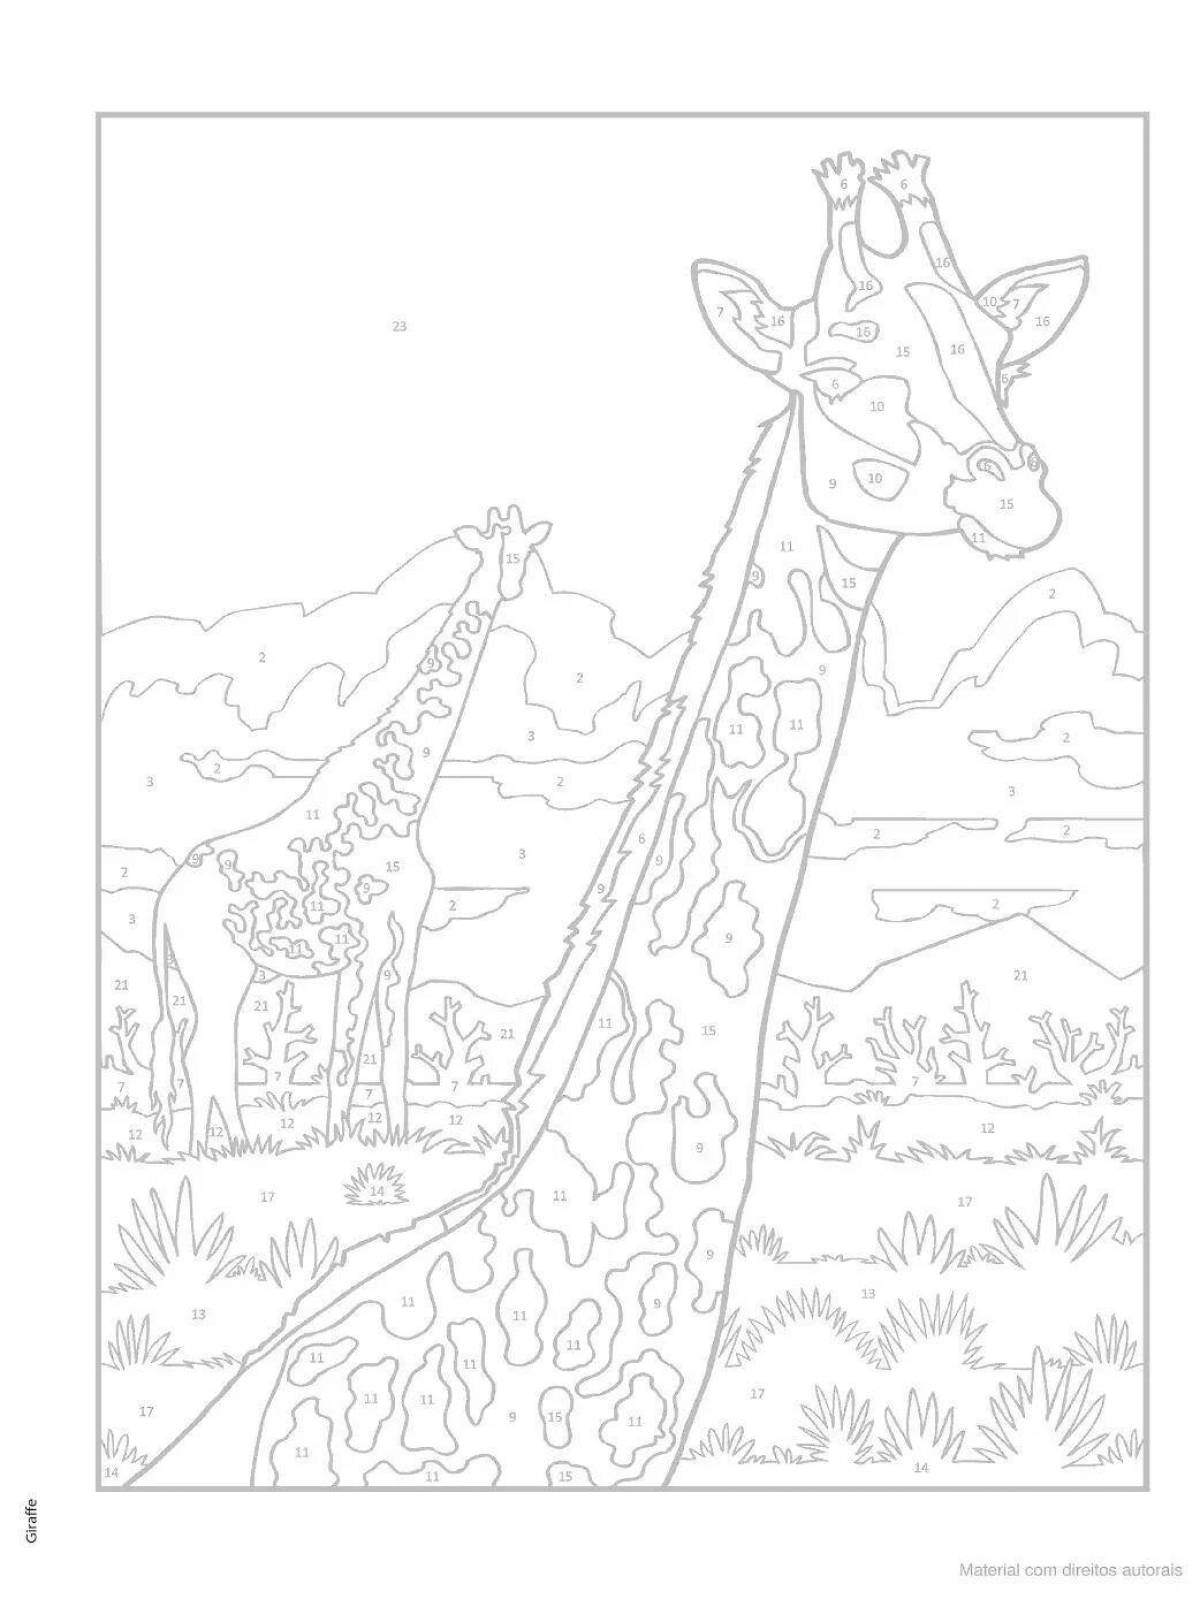 Funny giraffe color by number